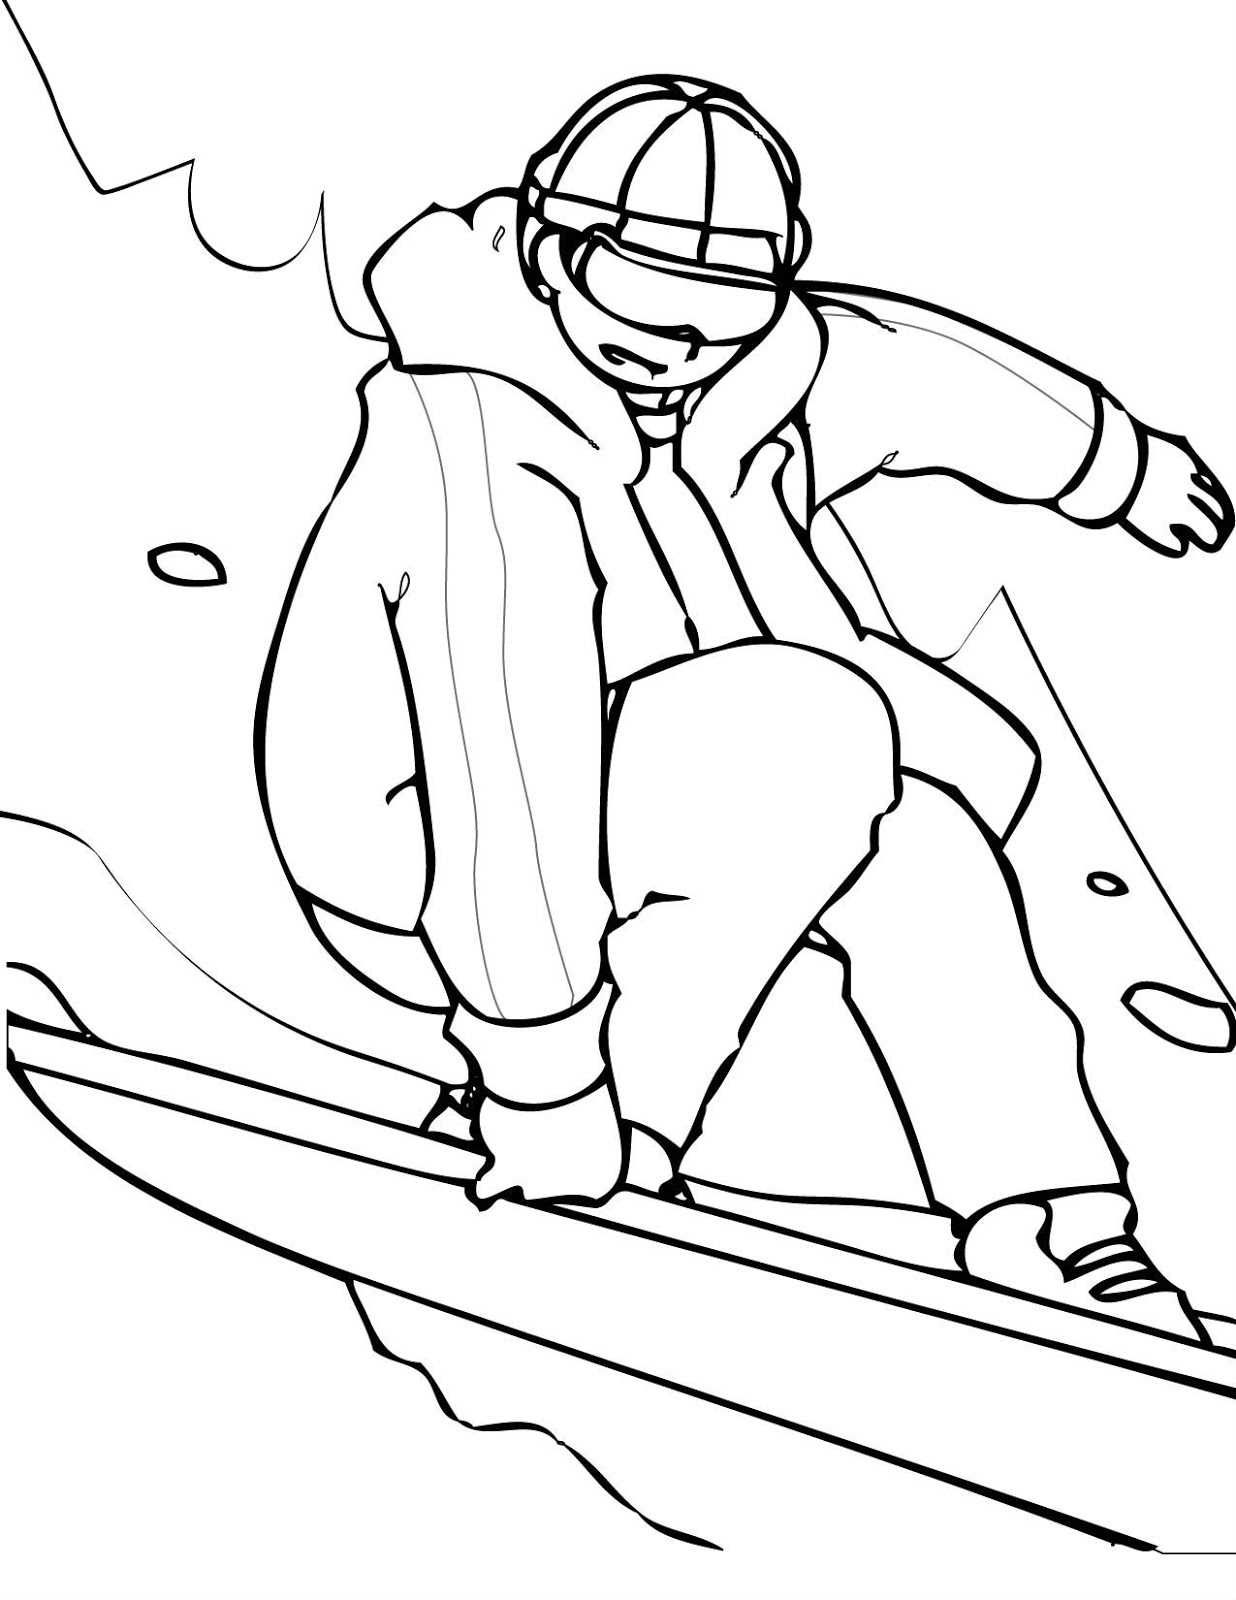 Sports Photograph Coloring Pages Kids Snowboarding